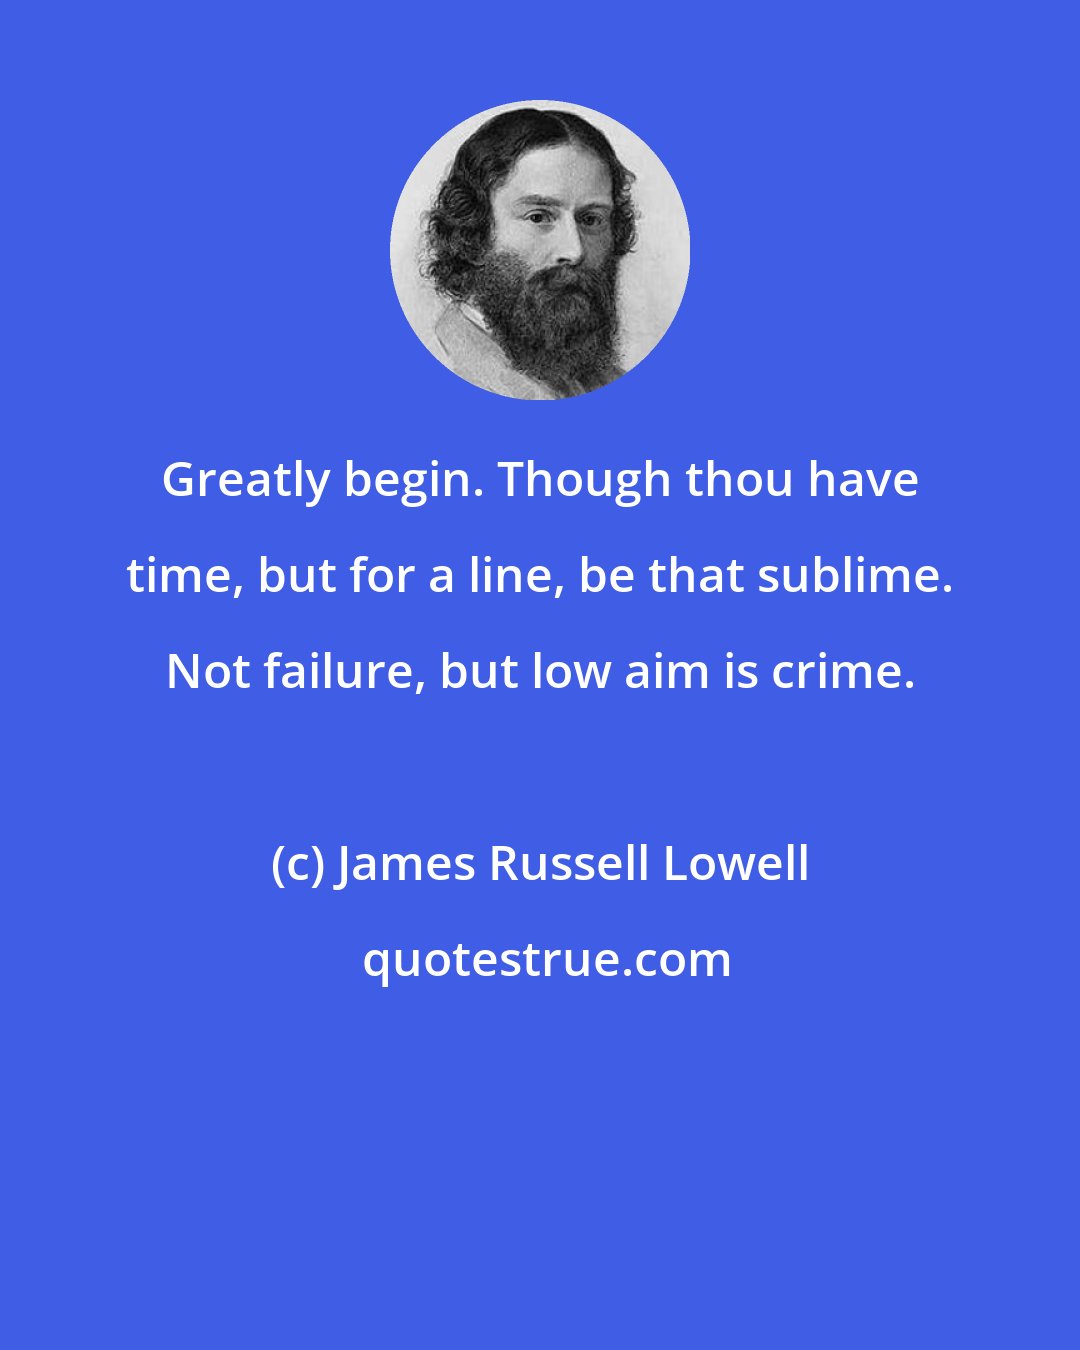 James Russell Lowell: Greatly begin. Though thou have time, but for a line, be that sublime. Not failure, but low aim is crime.